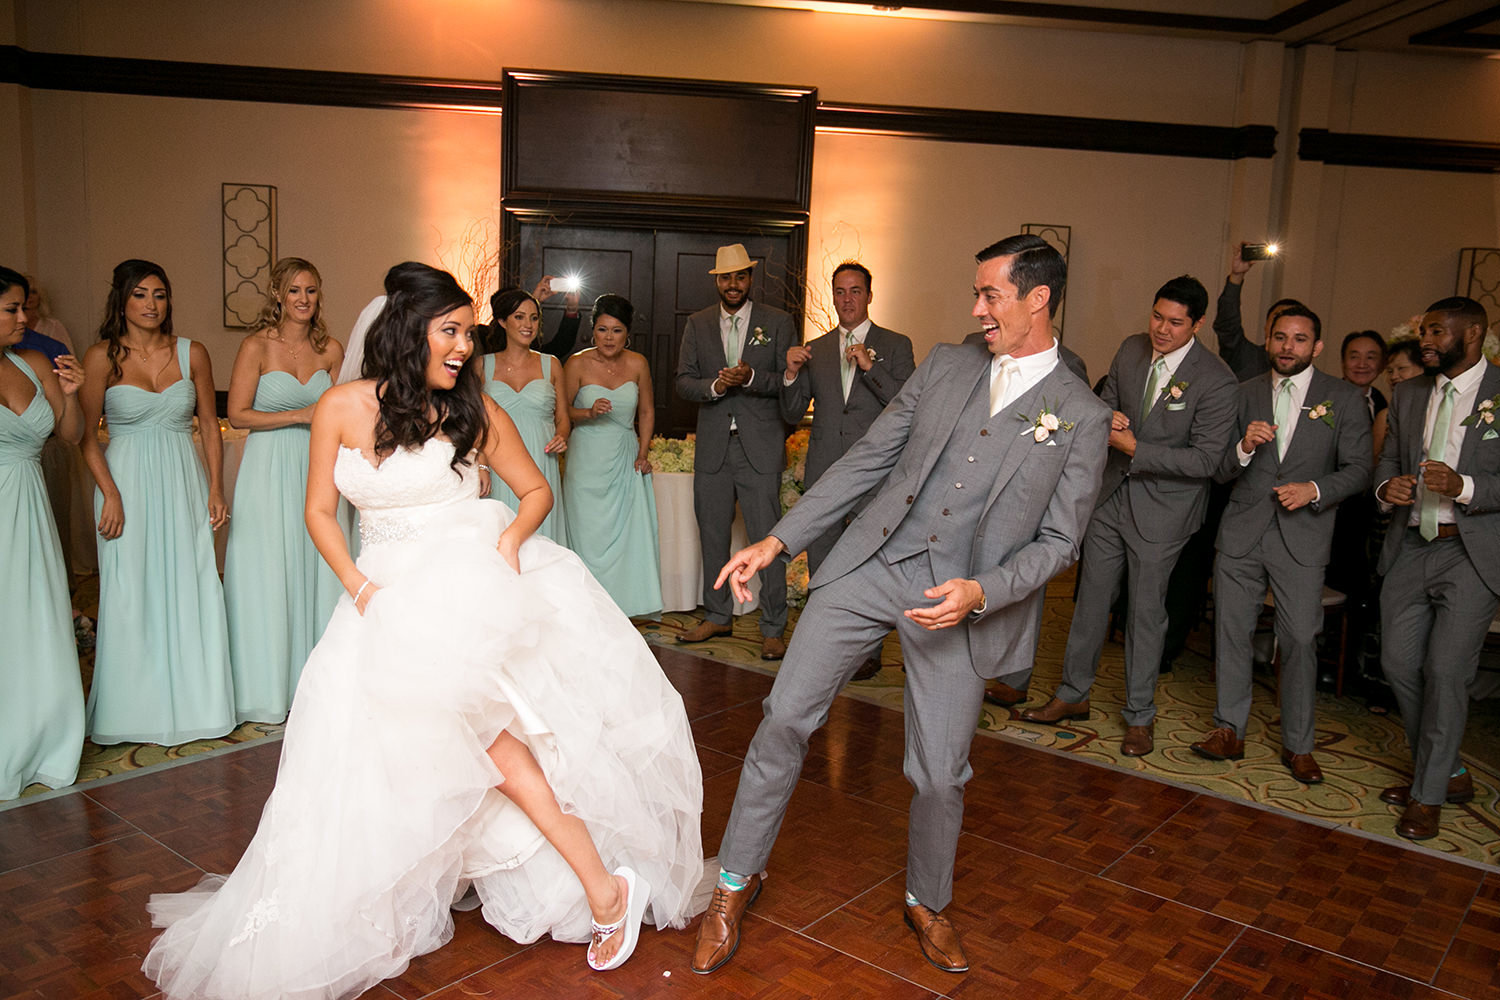 Choreographed first dance at the wedding reception